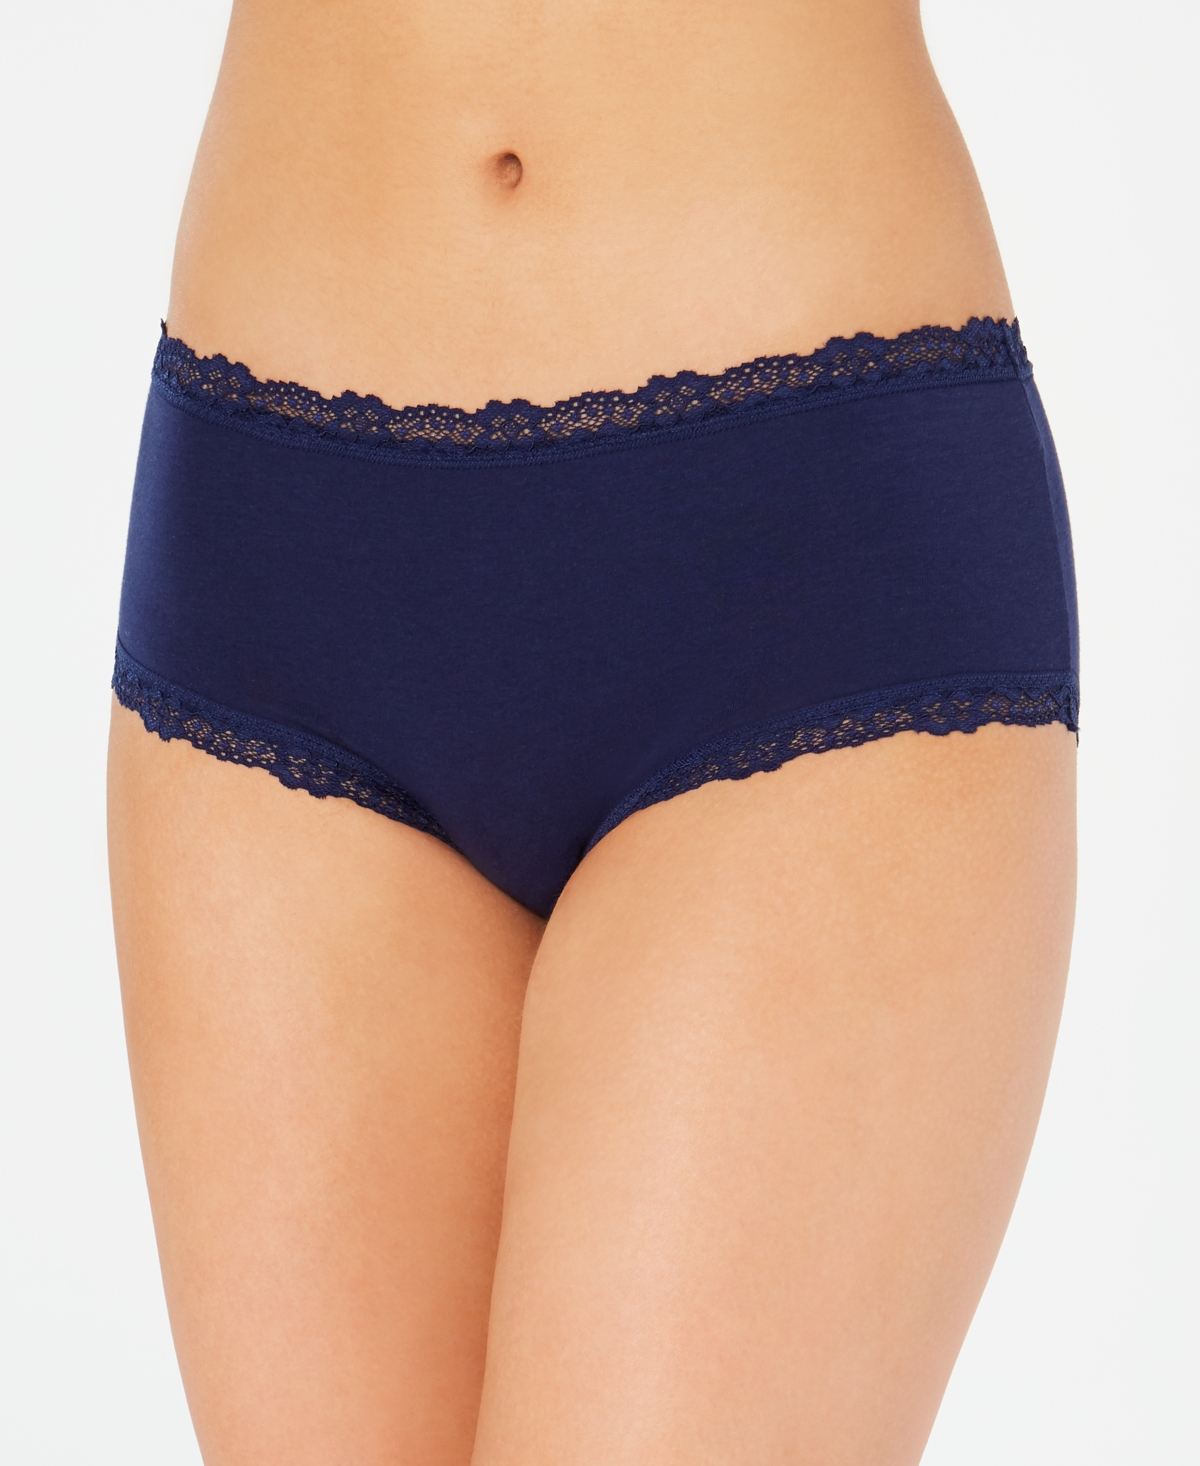 Women's Lace Trim Hipster Underwear, Created for Macy's - Navy Sea